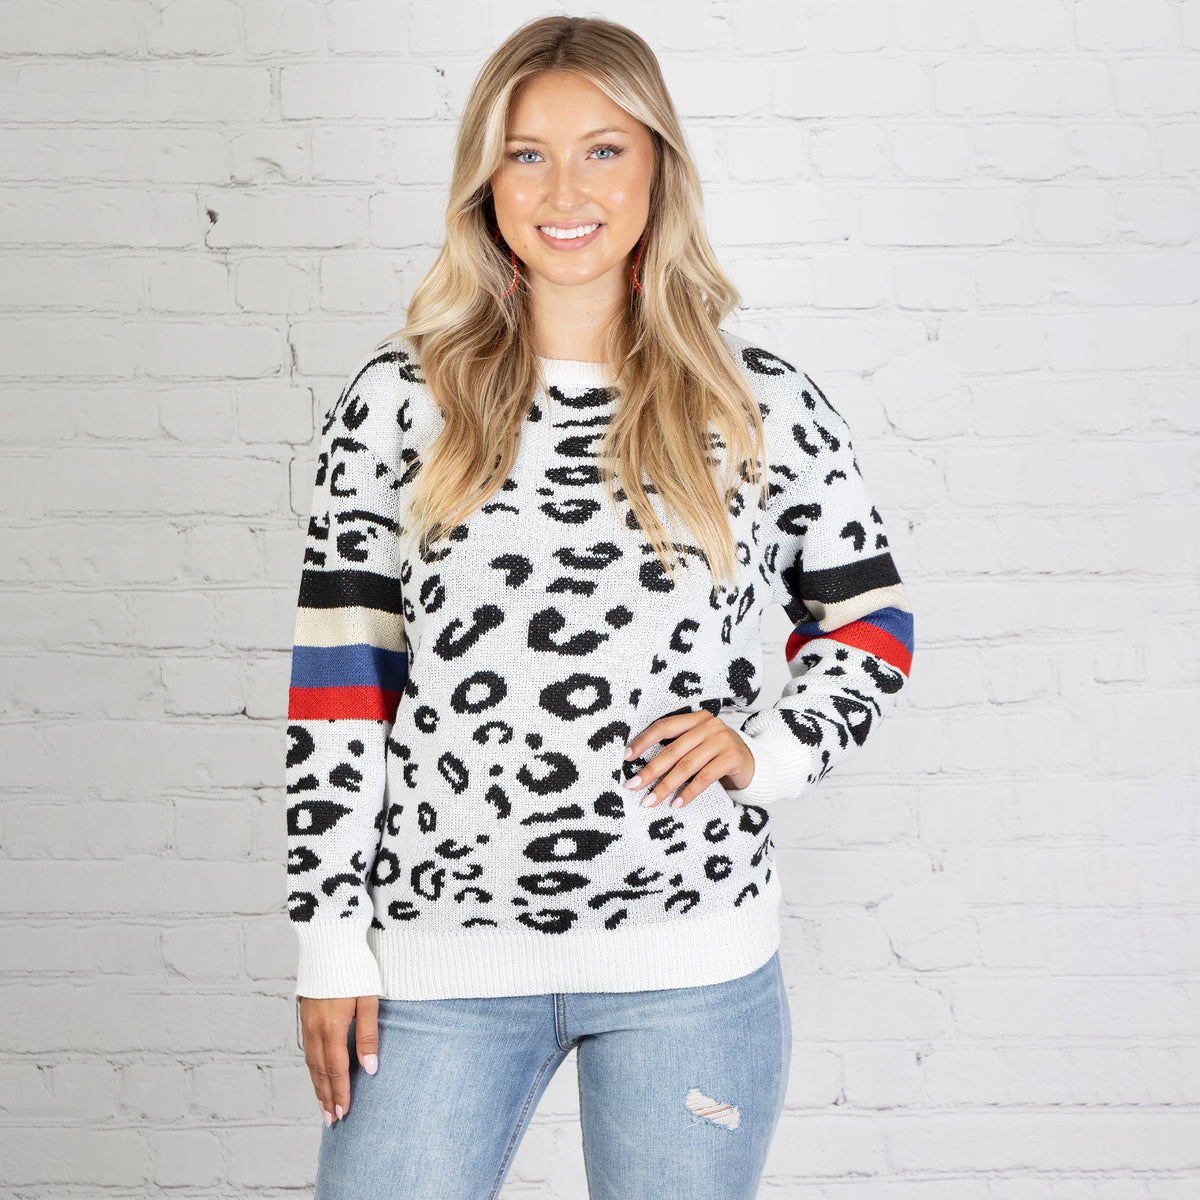 10610 - White Leopard Sweater with Striped Sleeves